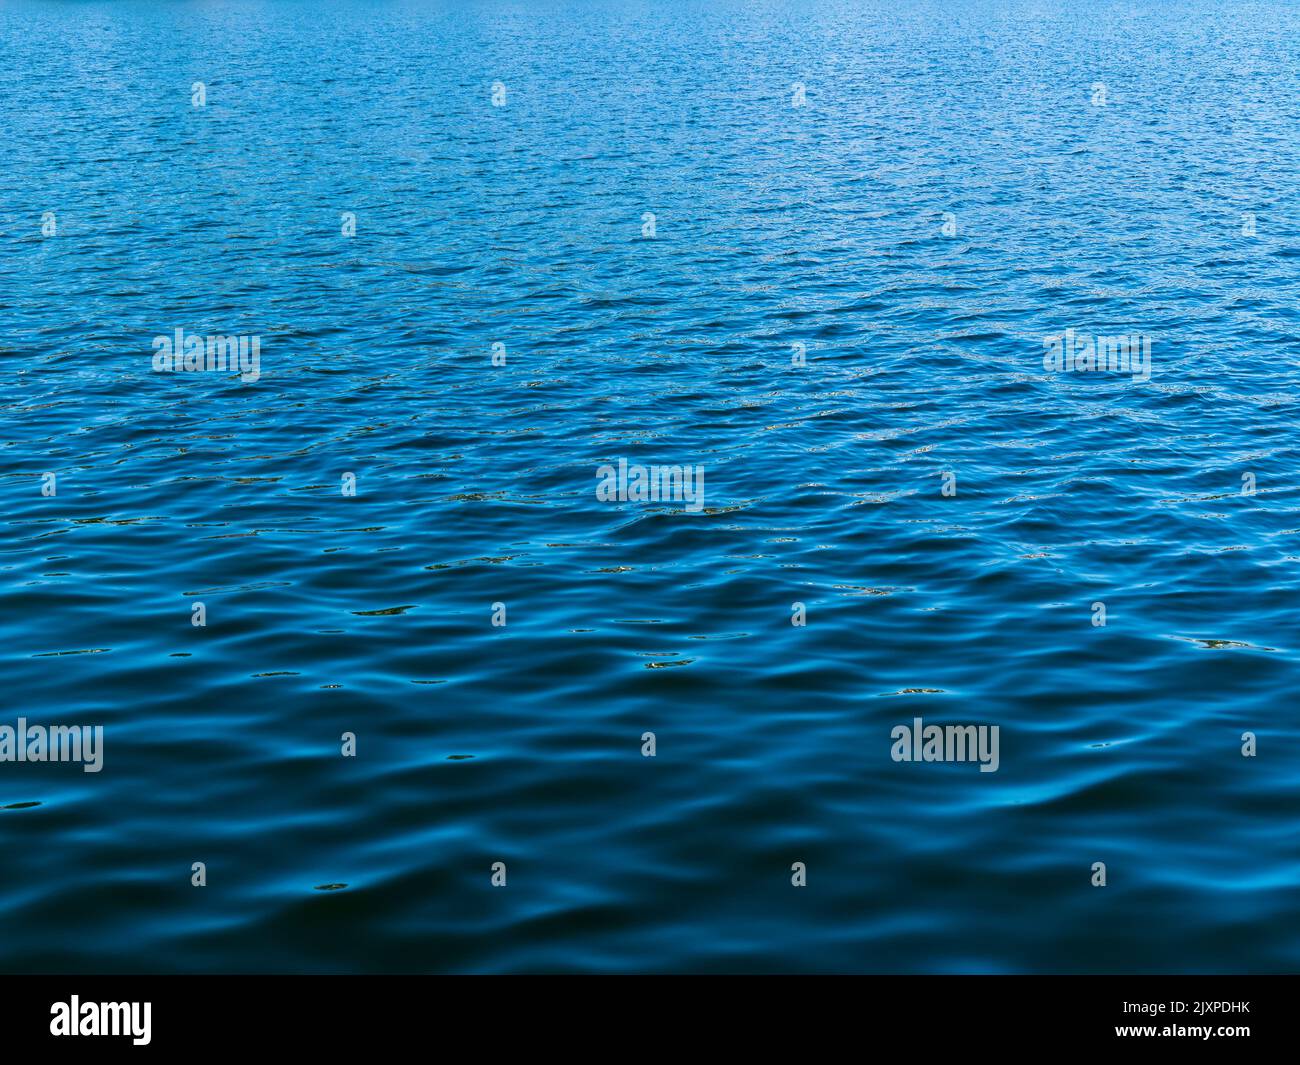 Waterlight light and dark blues ripple in diamond-shaped shapes across the harbor surface. Stock Photo